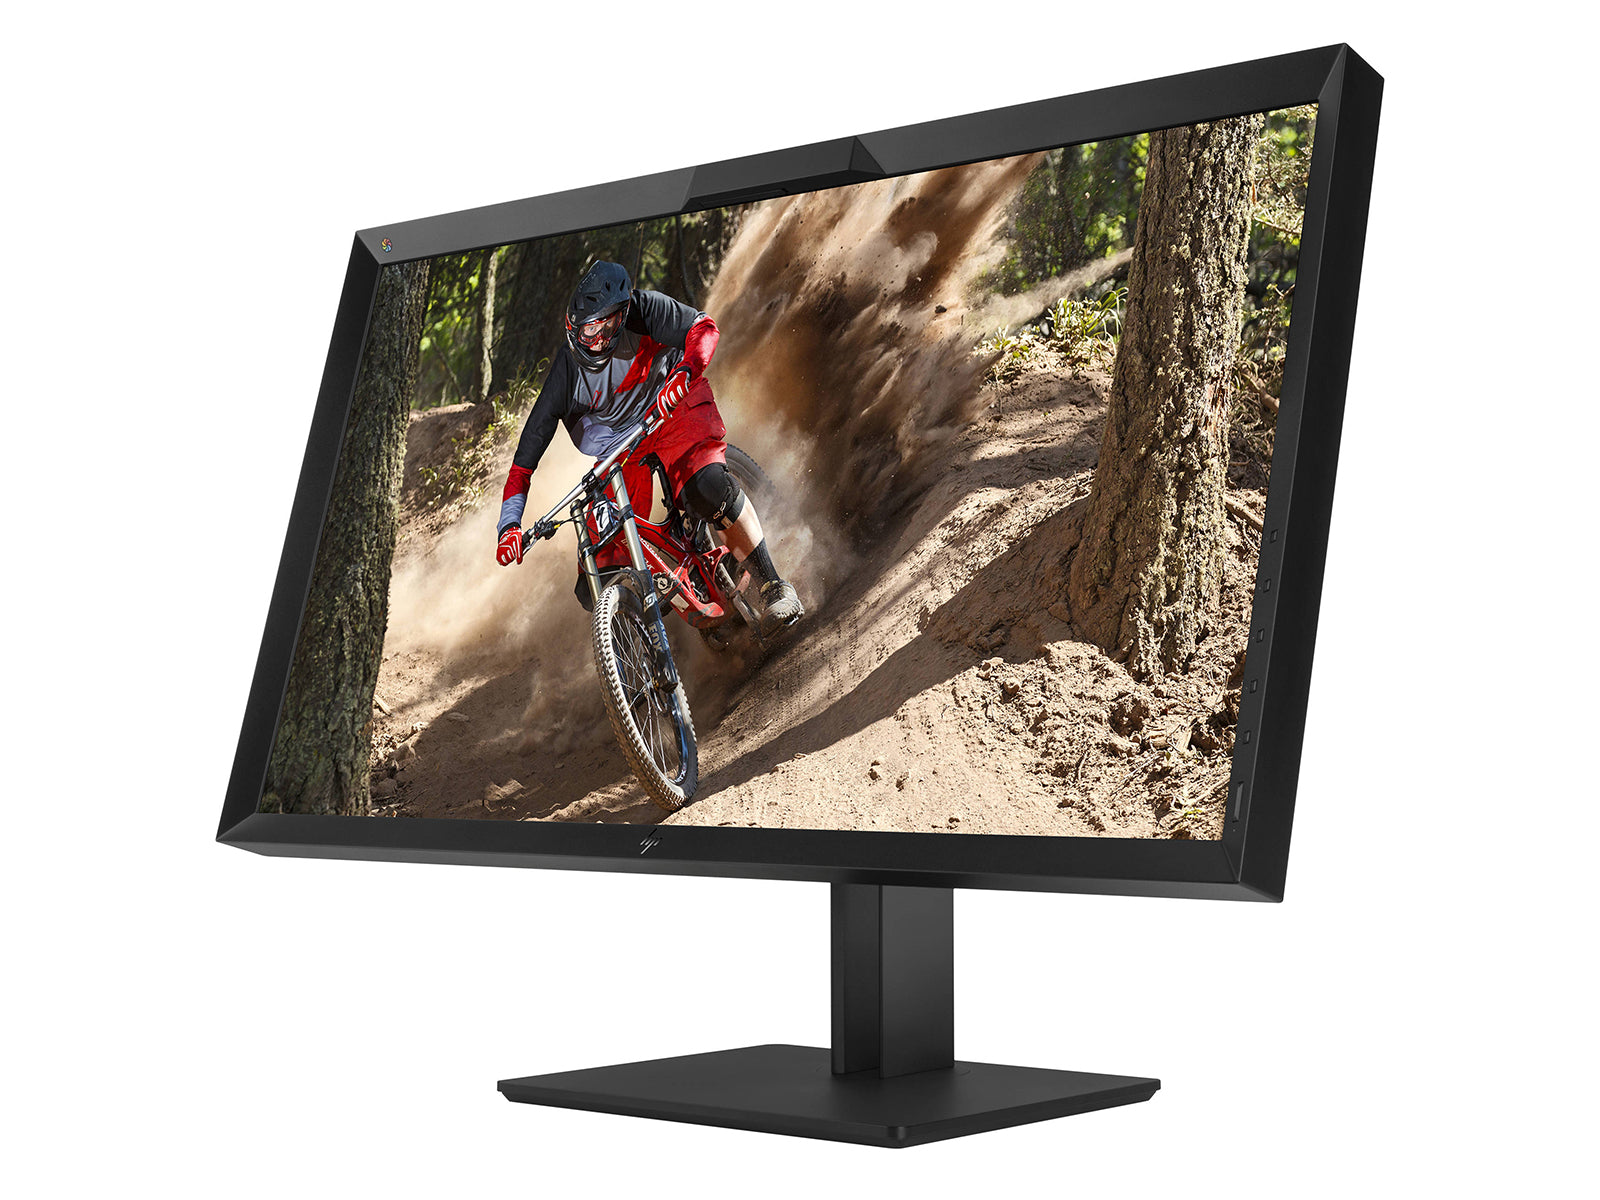 HP DreamColor Z31x 4K 31" Farb-LED-Display-Monitor (Z4Y82A8#ABA) Monitors.com